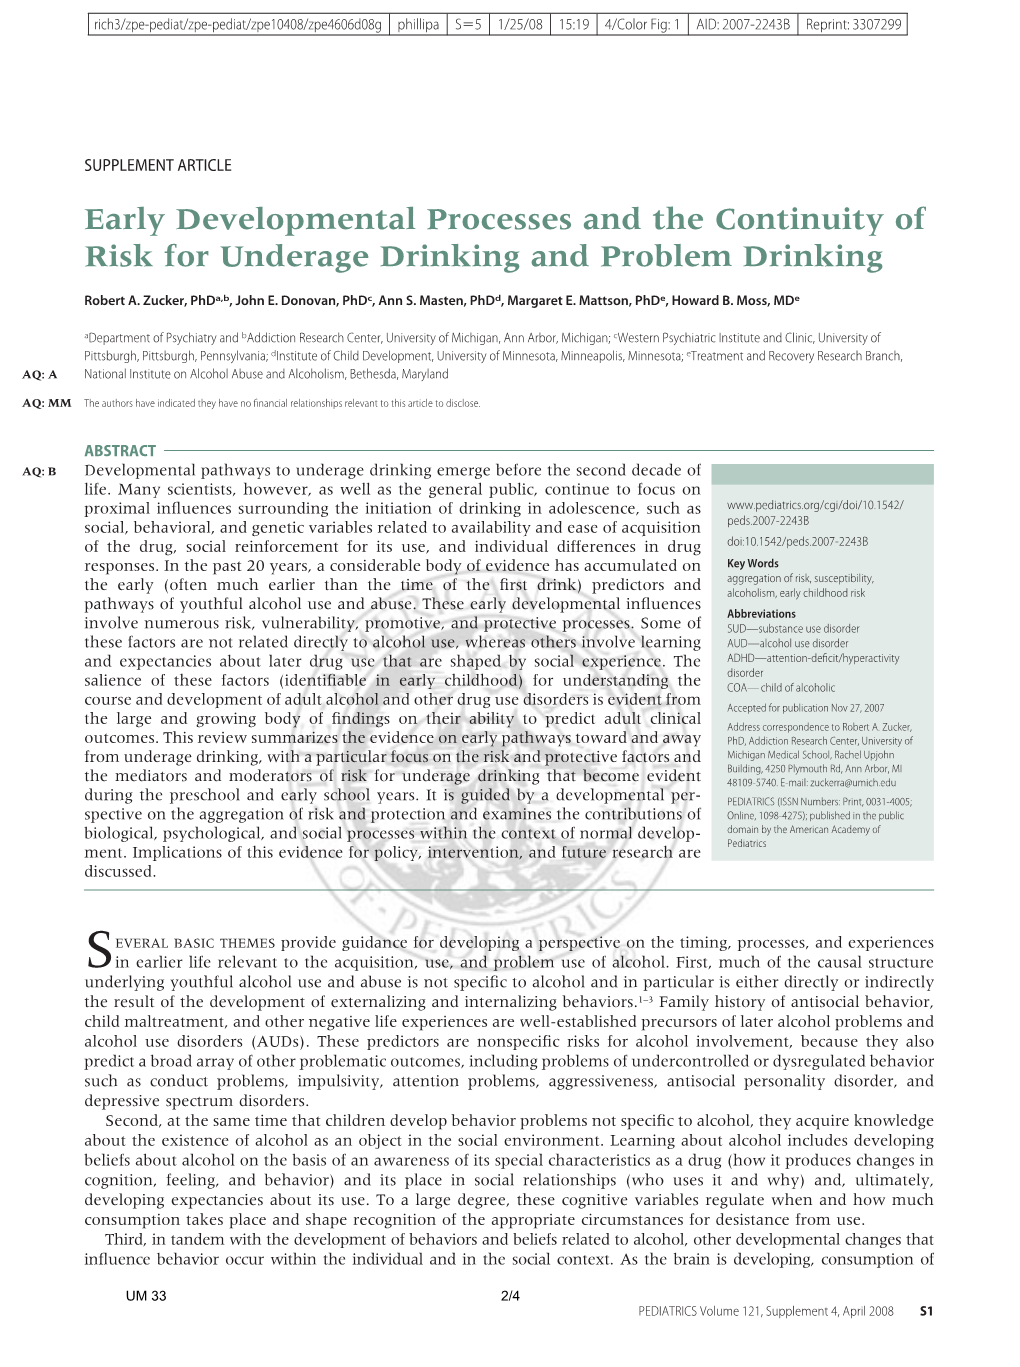 Early Developmental Processes and the Continuity of Risk for Underage Drinking and Problem Drinking